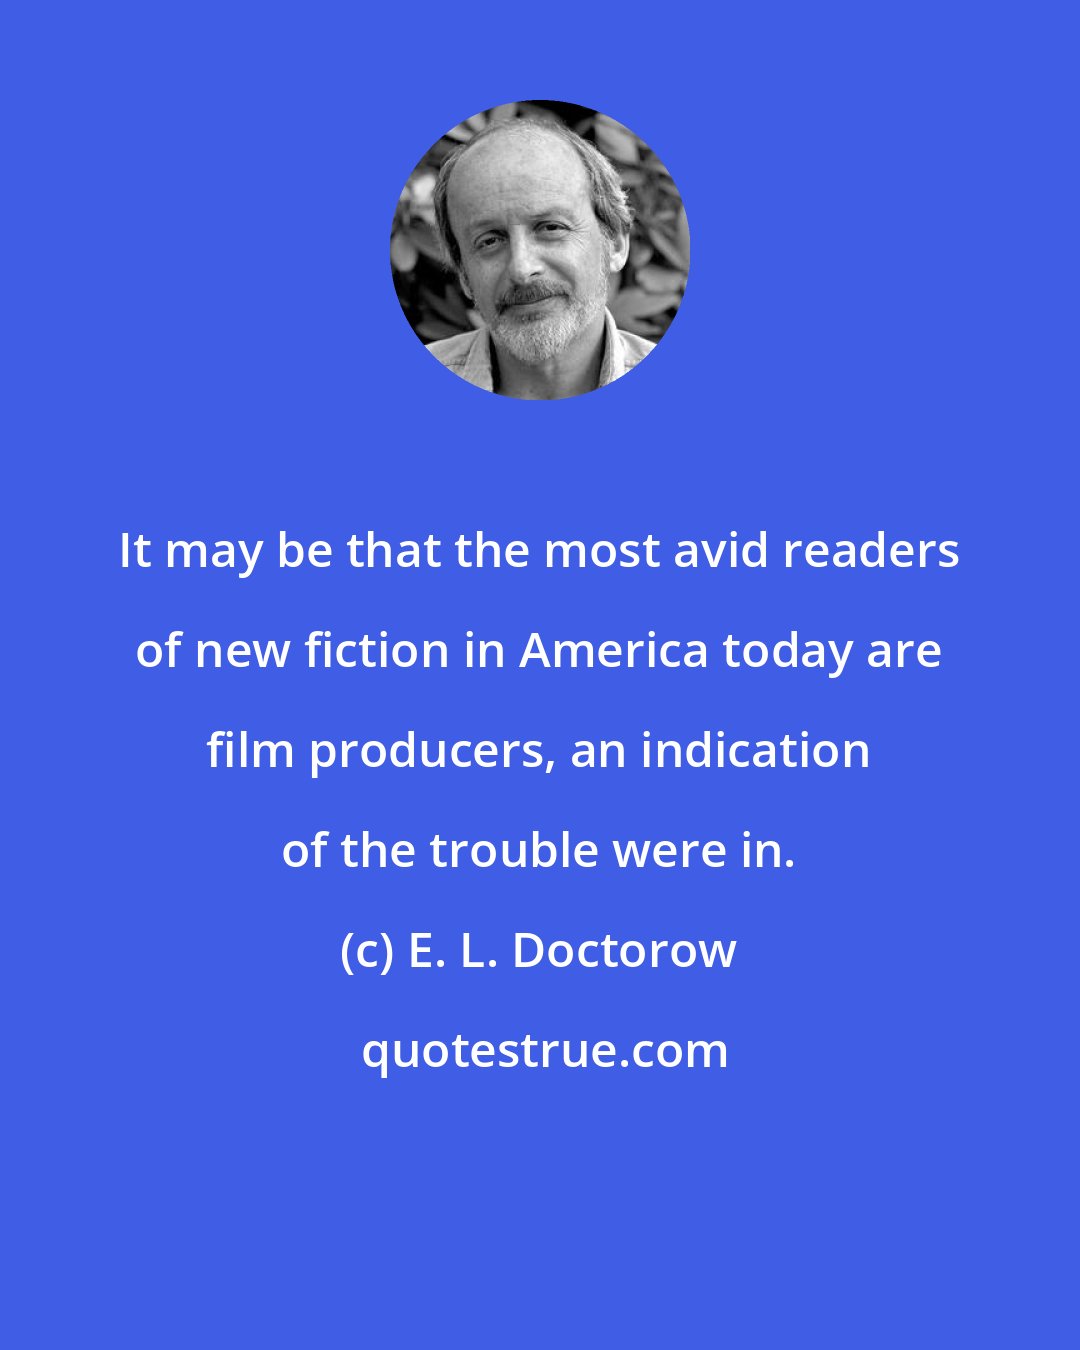 E. L. Doctorow: It may be that the most avid readers of new fiction in America today are film producers, an indication of the trouble were in.